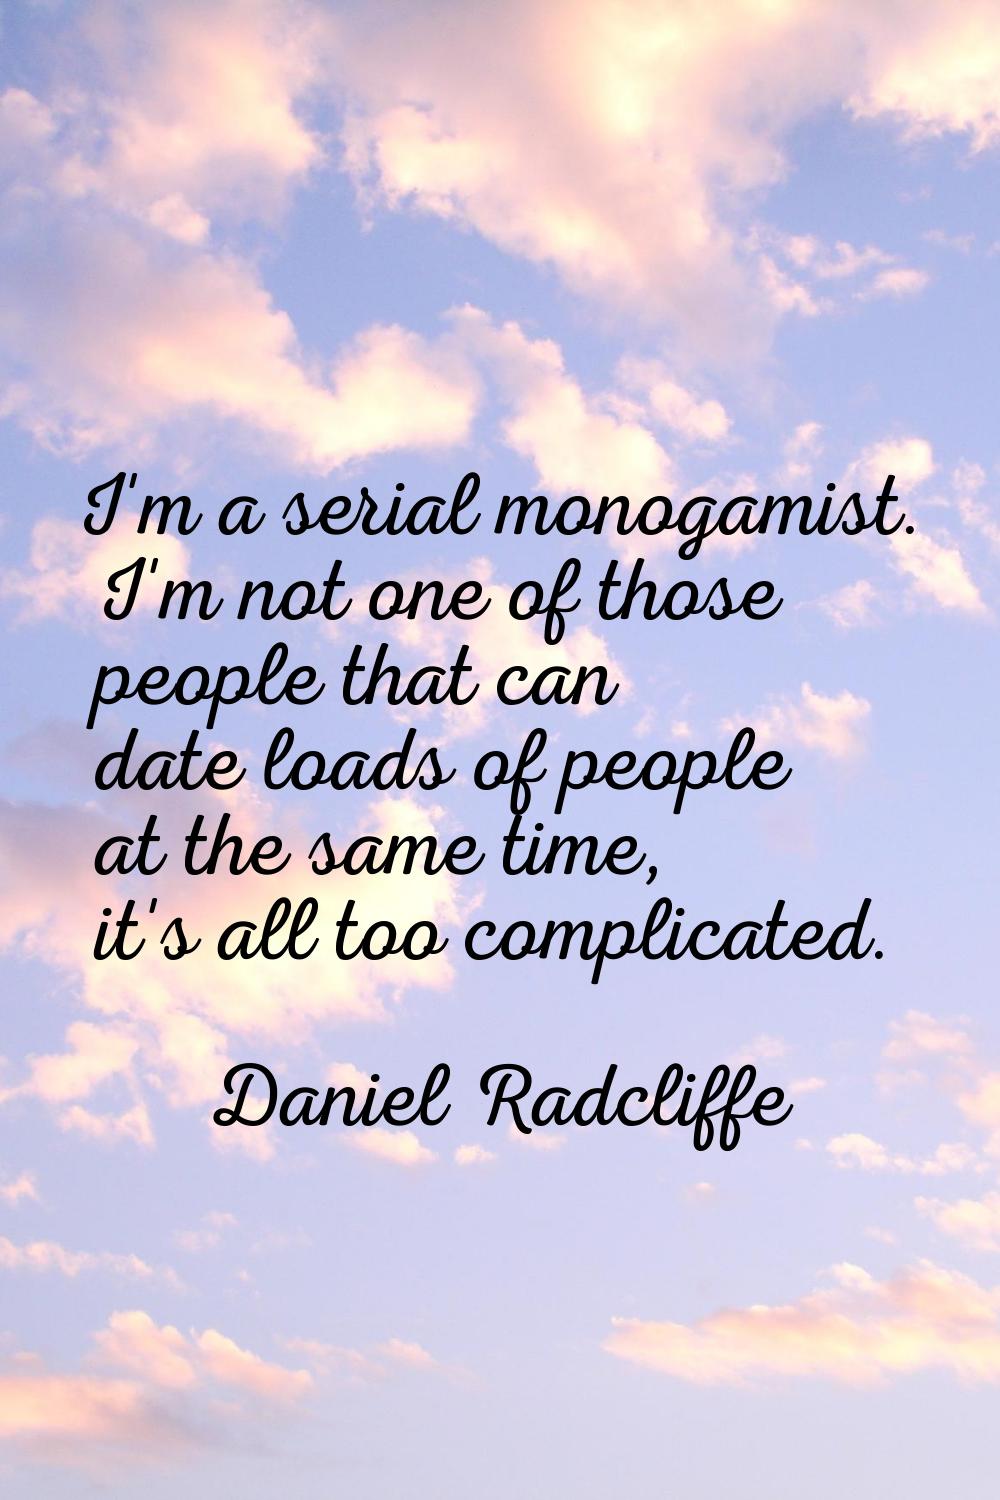 I'm a serial monogamist. I'm not one of those people that can date loads of people at the same time